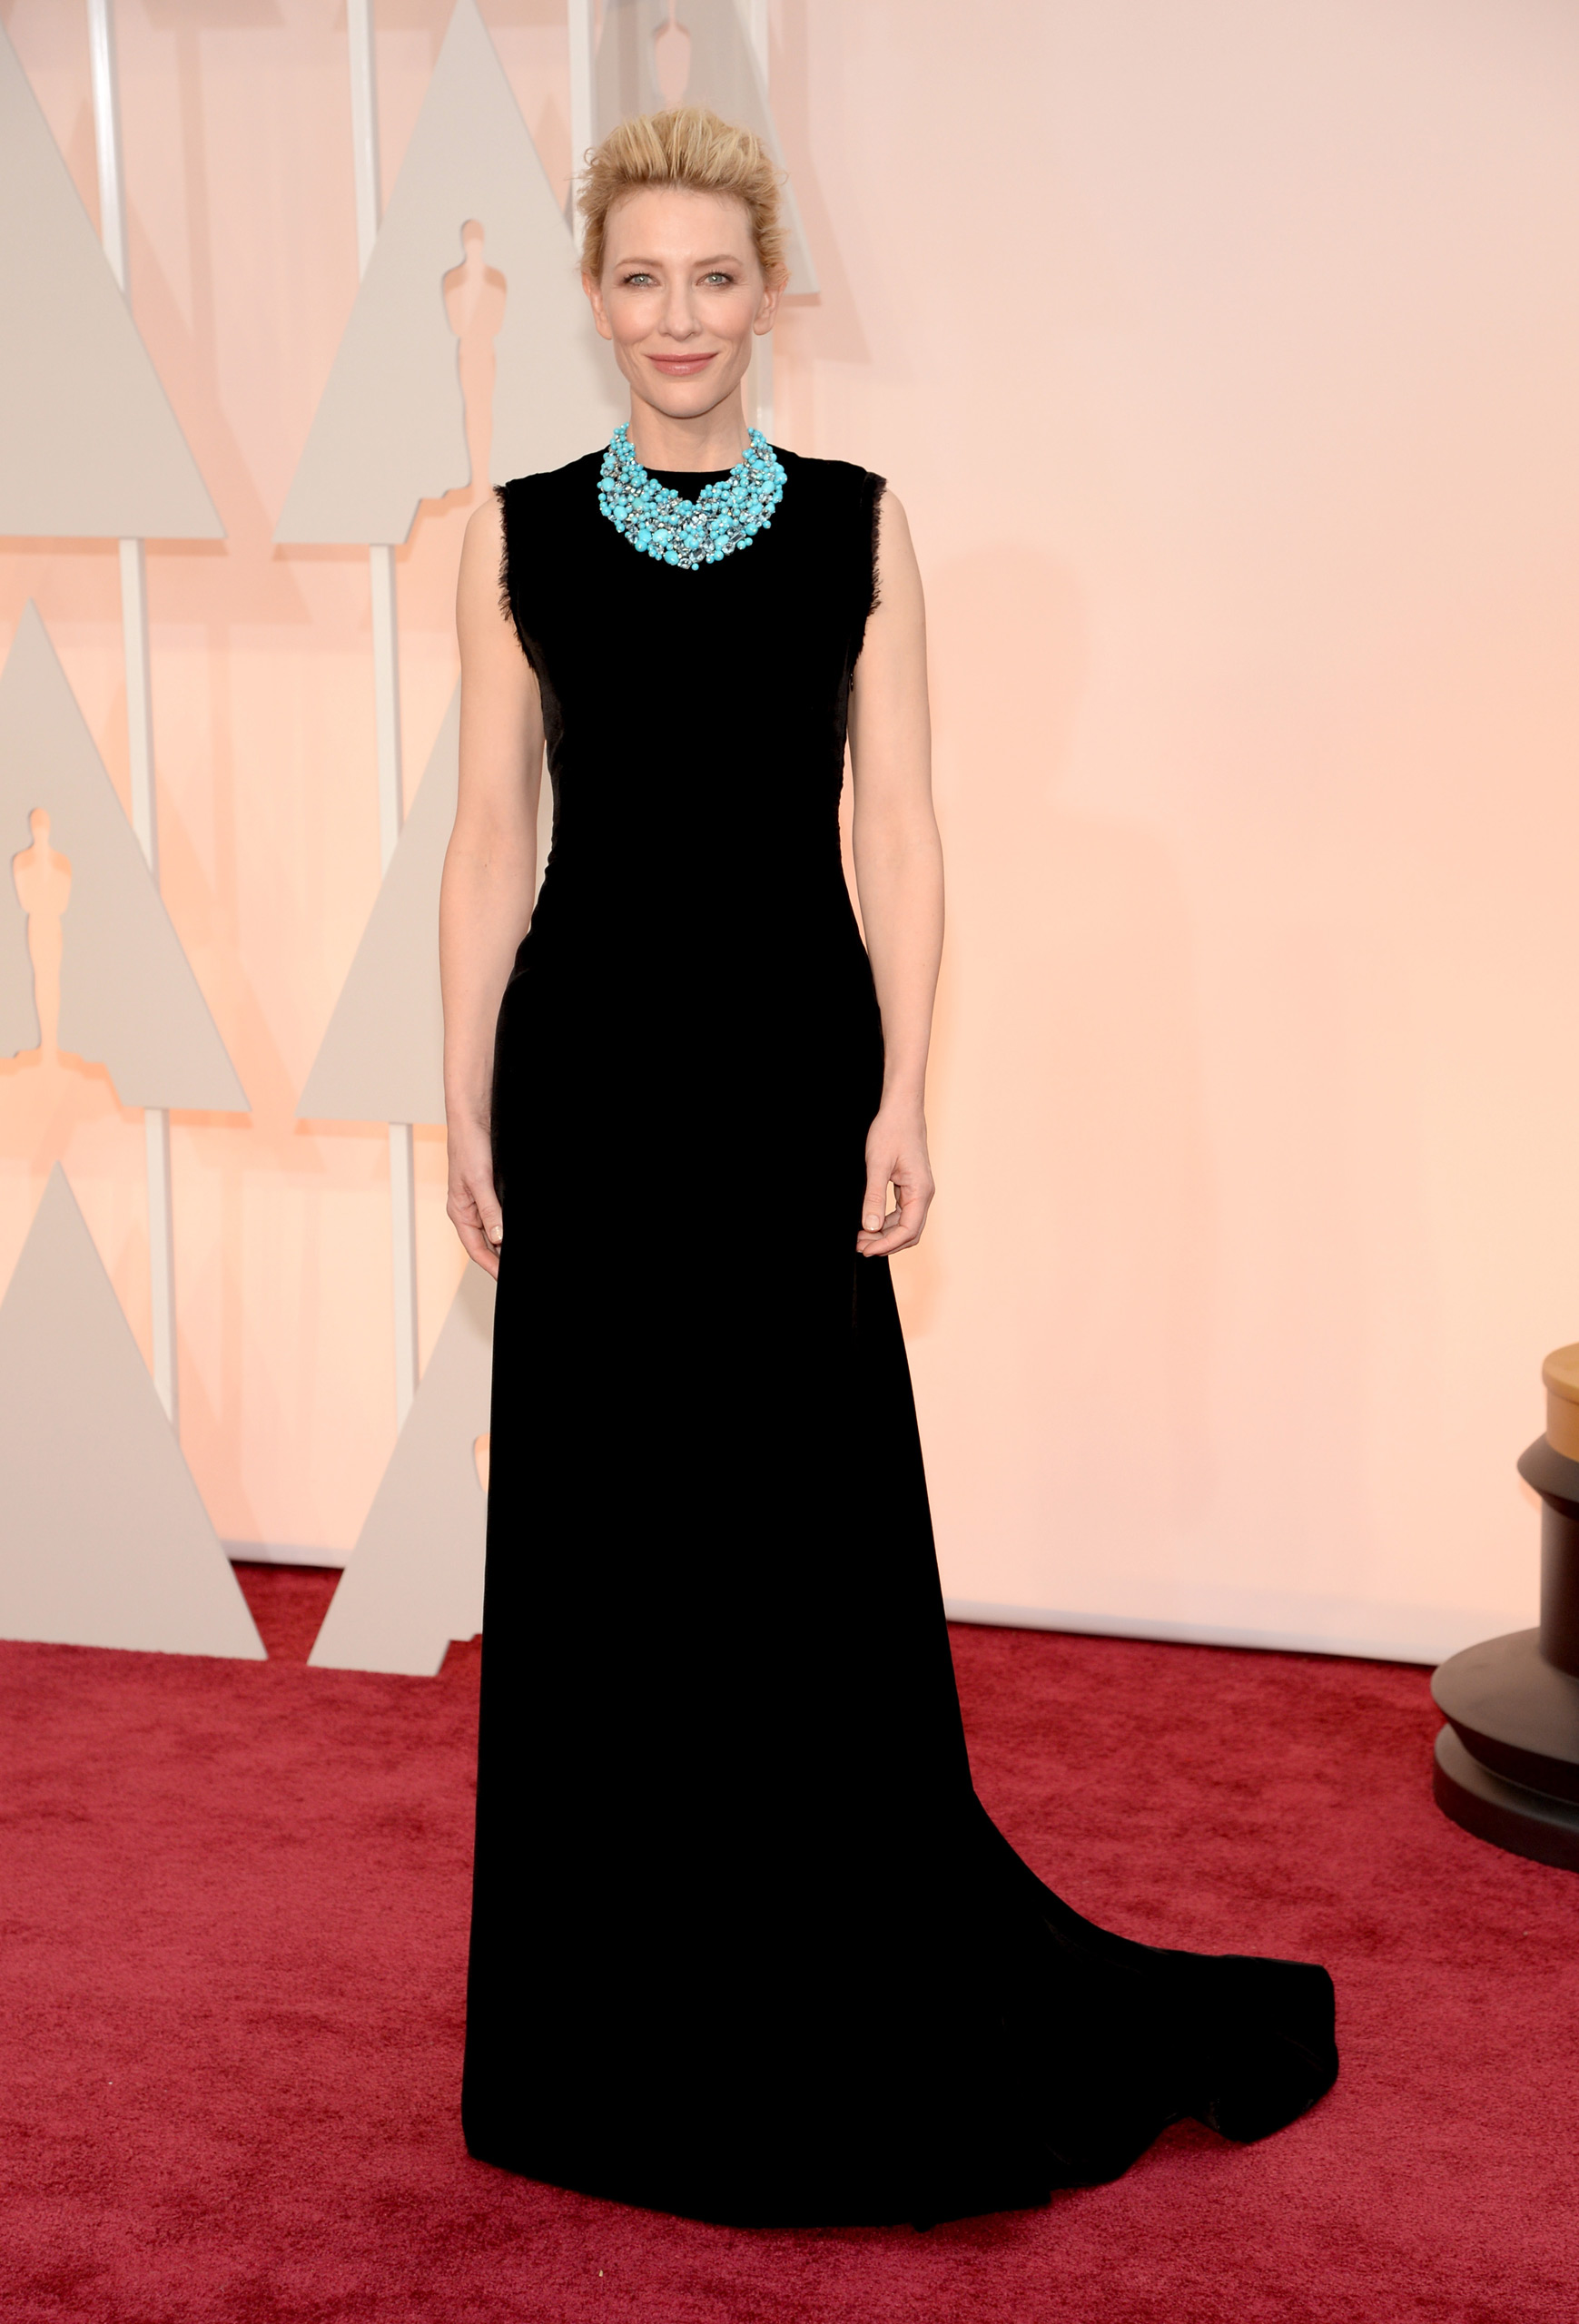 Cate Blanchett attends the 87th Annual Academy Awards on Feb. 22, 2015 in Hollywood, Calif.